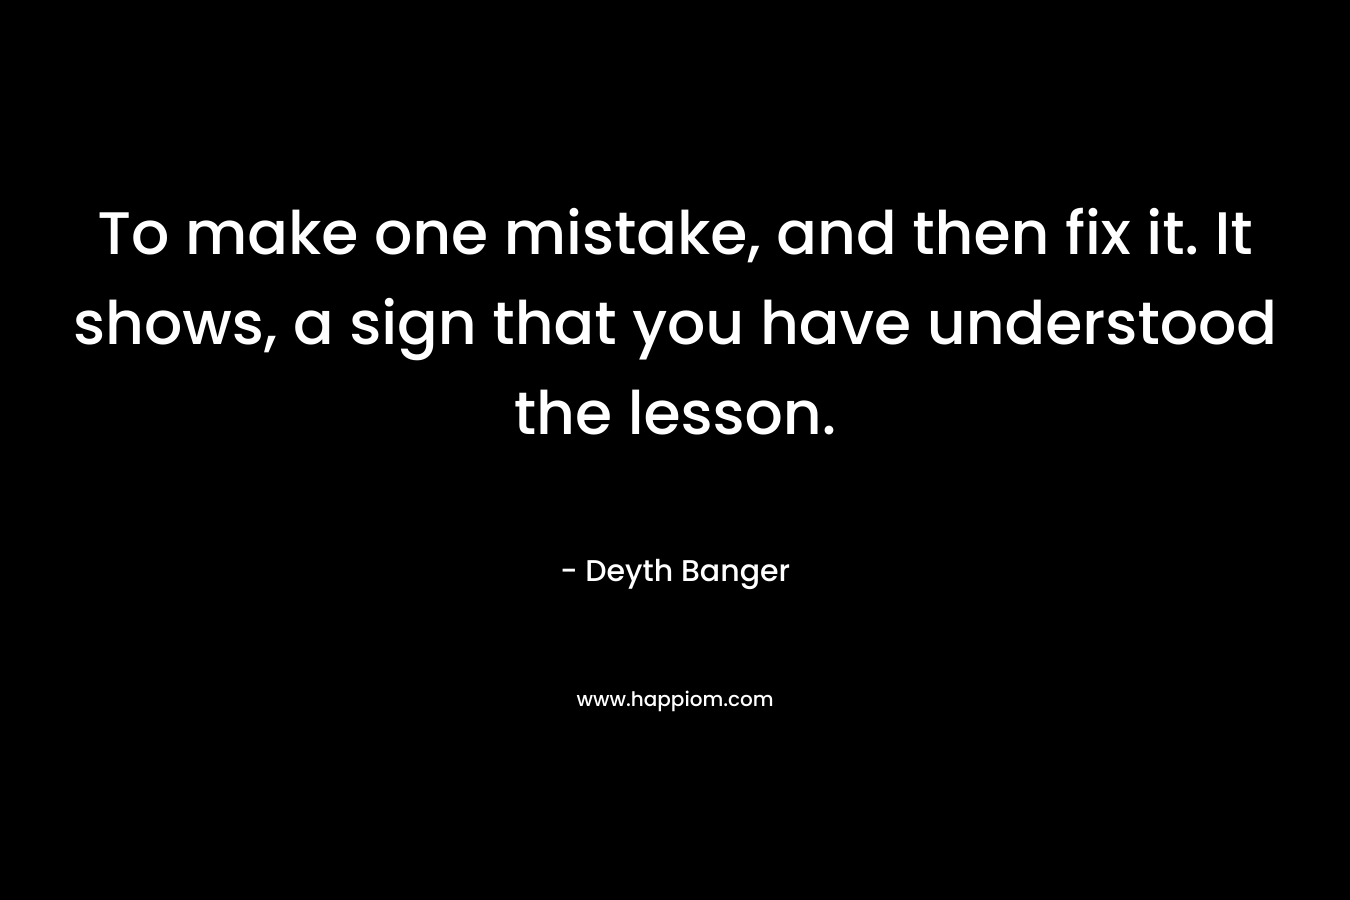 To make one mistake, and then fix it. It shows, a sign that you have understood the lesson. – Deyth Banger